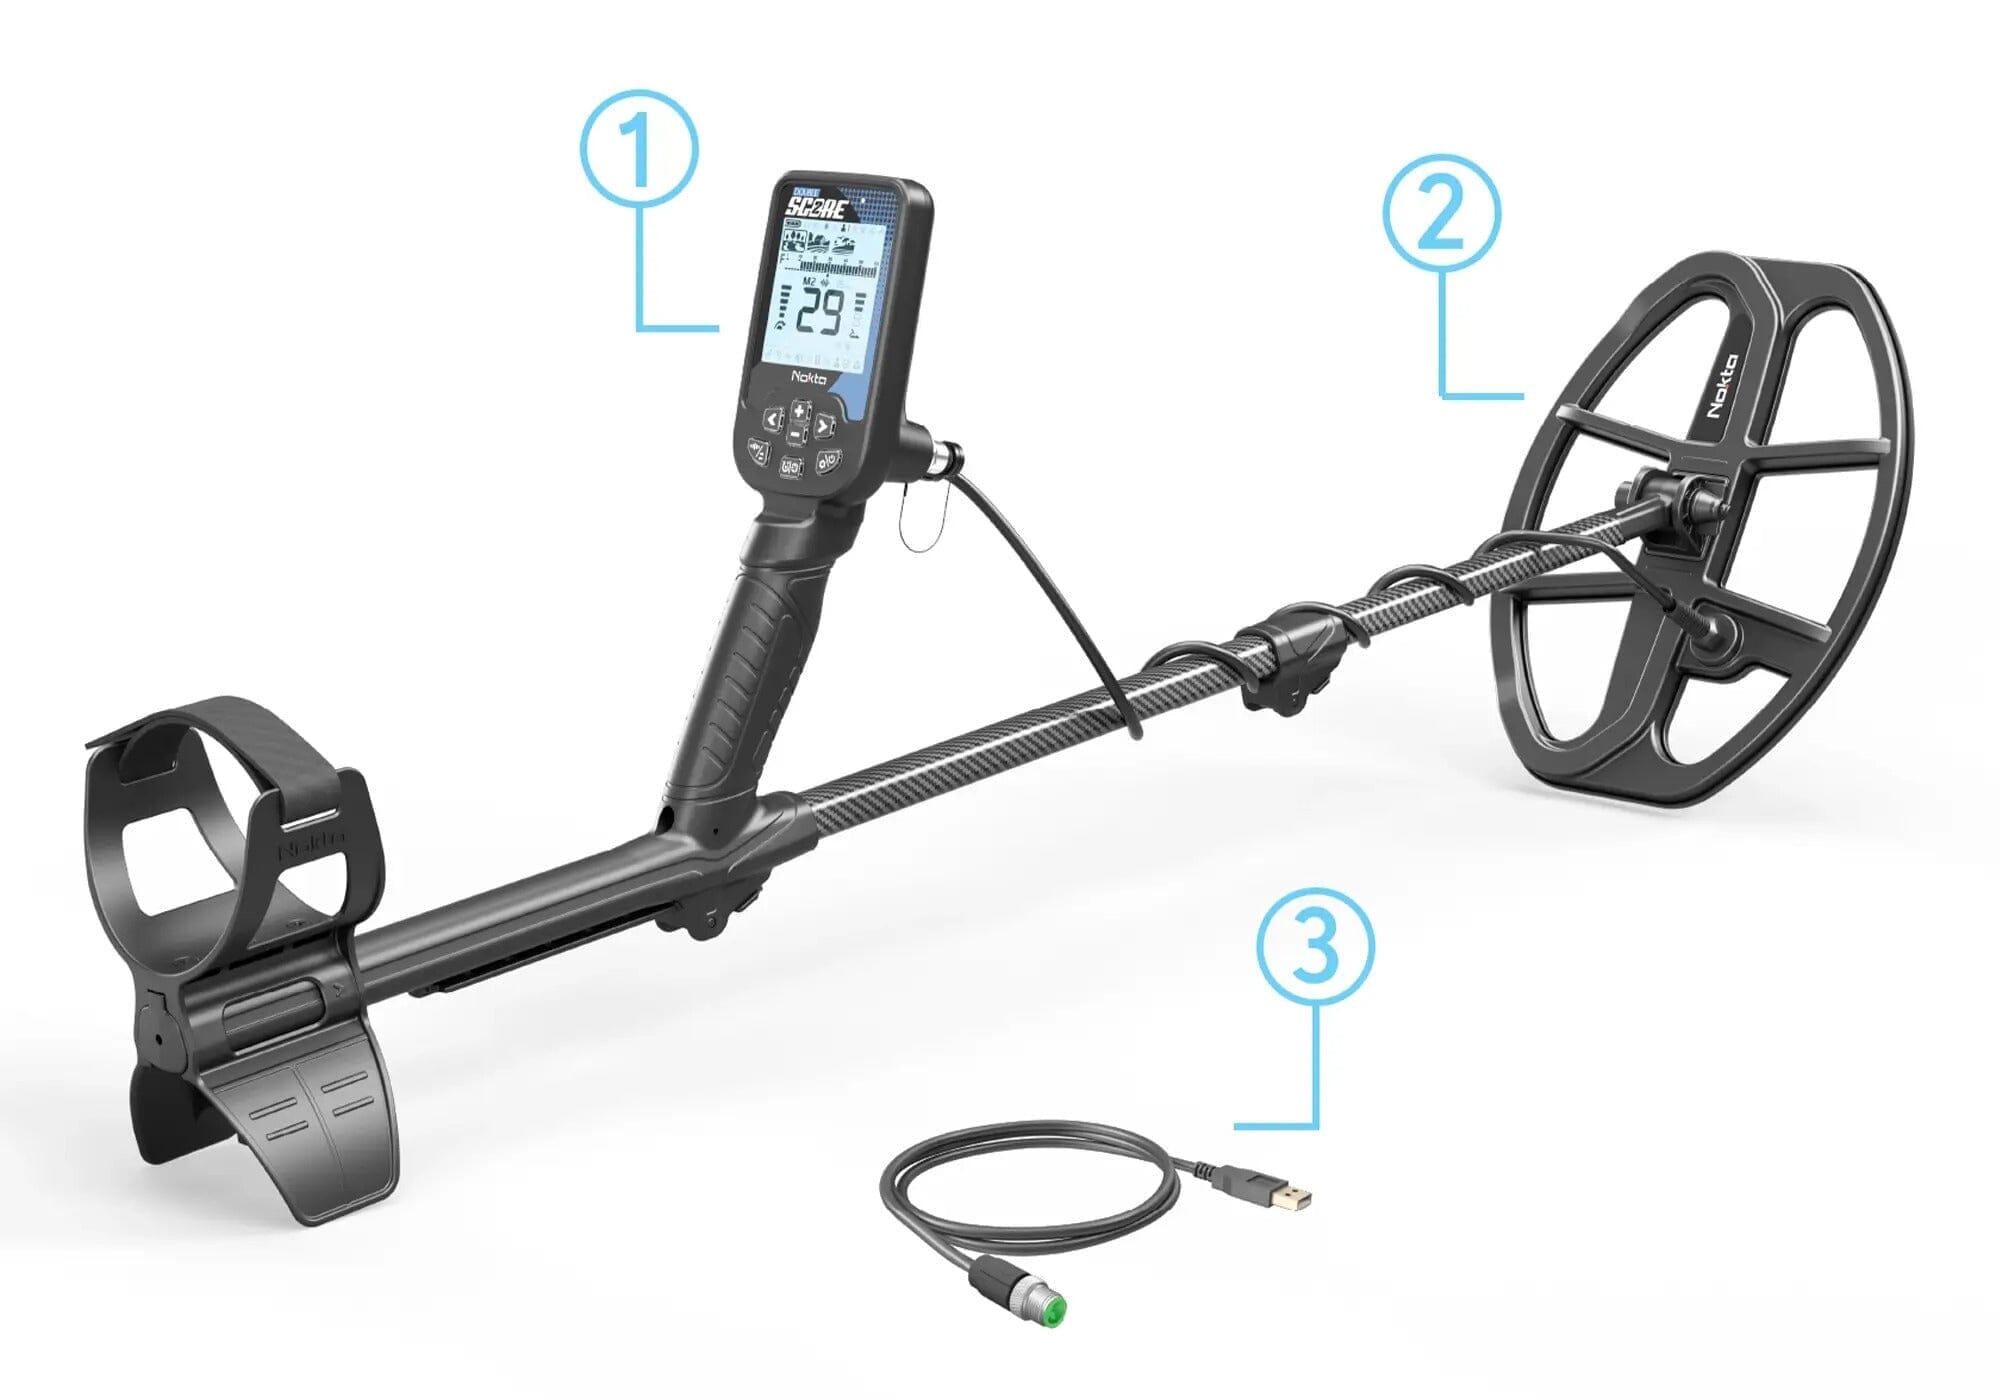 Nokta DOUBLE SCORE Metal Detector - Multifrequency For All! with Bluetooth Headphones